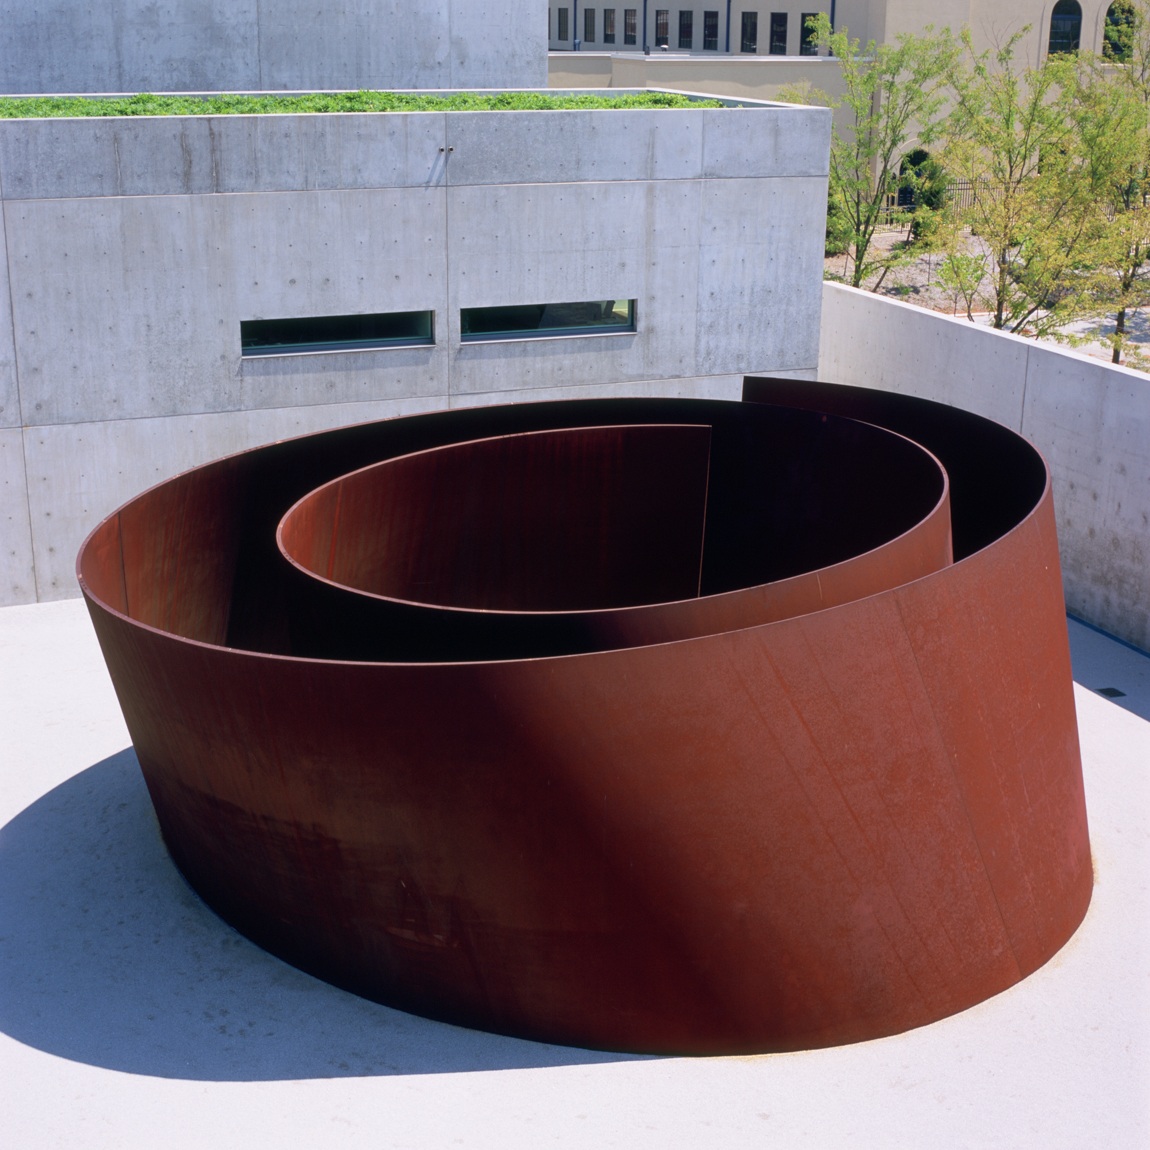 A sculpture by Richard Serra titled, Joe. An imposing spiral like a nautilus shell made of Cor-Ten steel is situated in a gravel courtyard next to the Pulitzer Arts Foundation building.